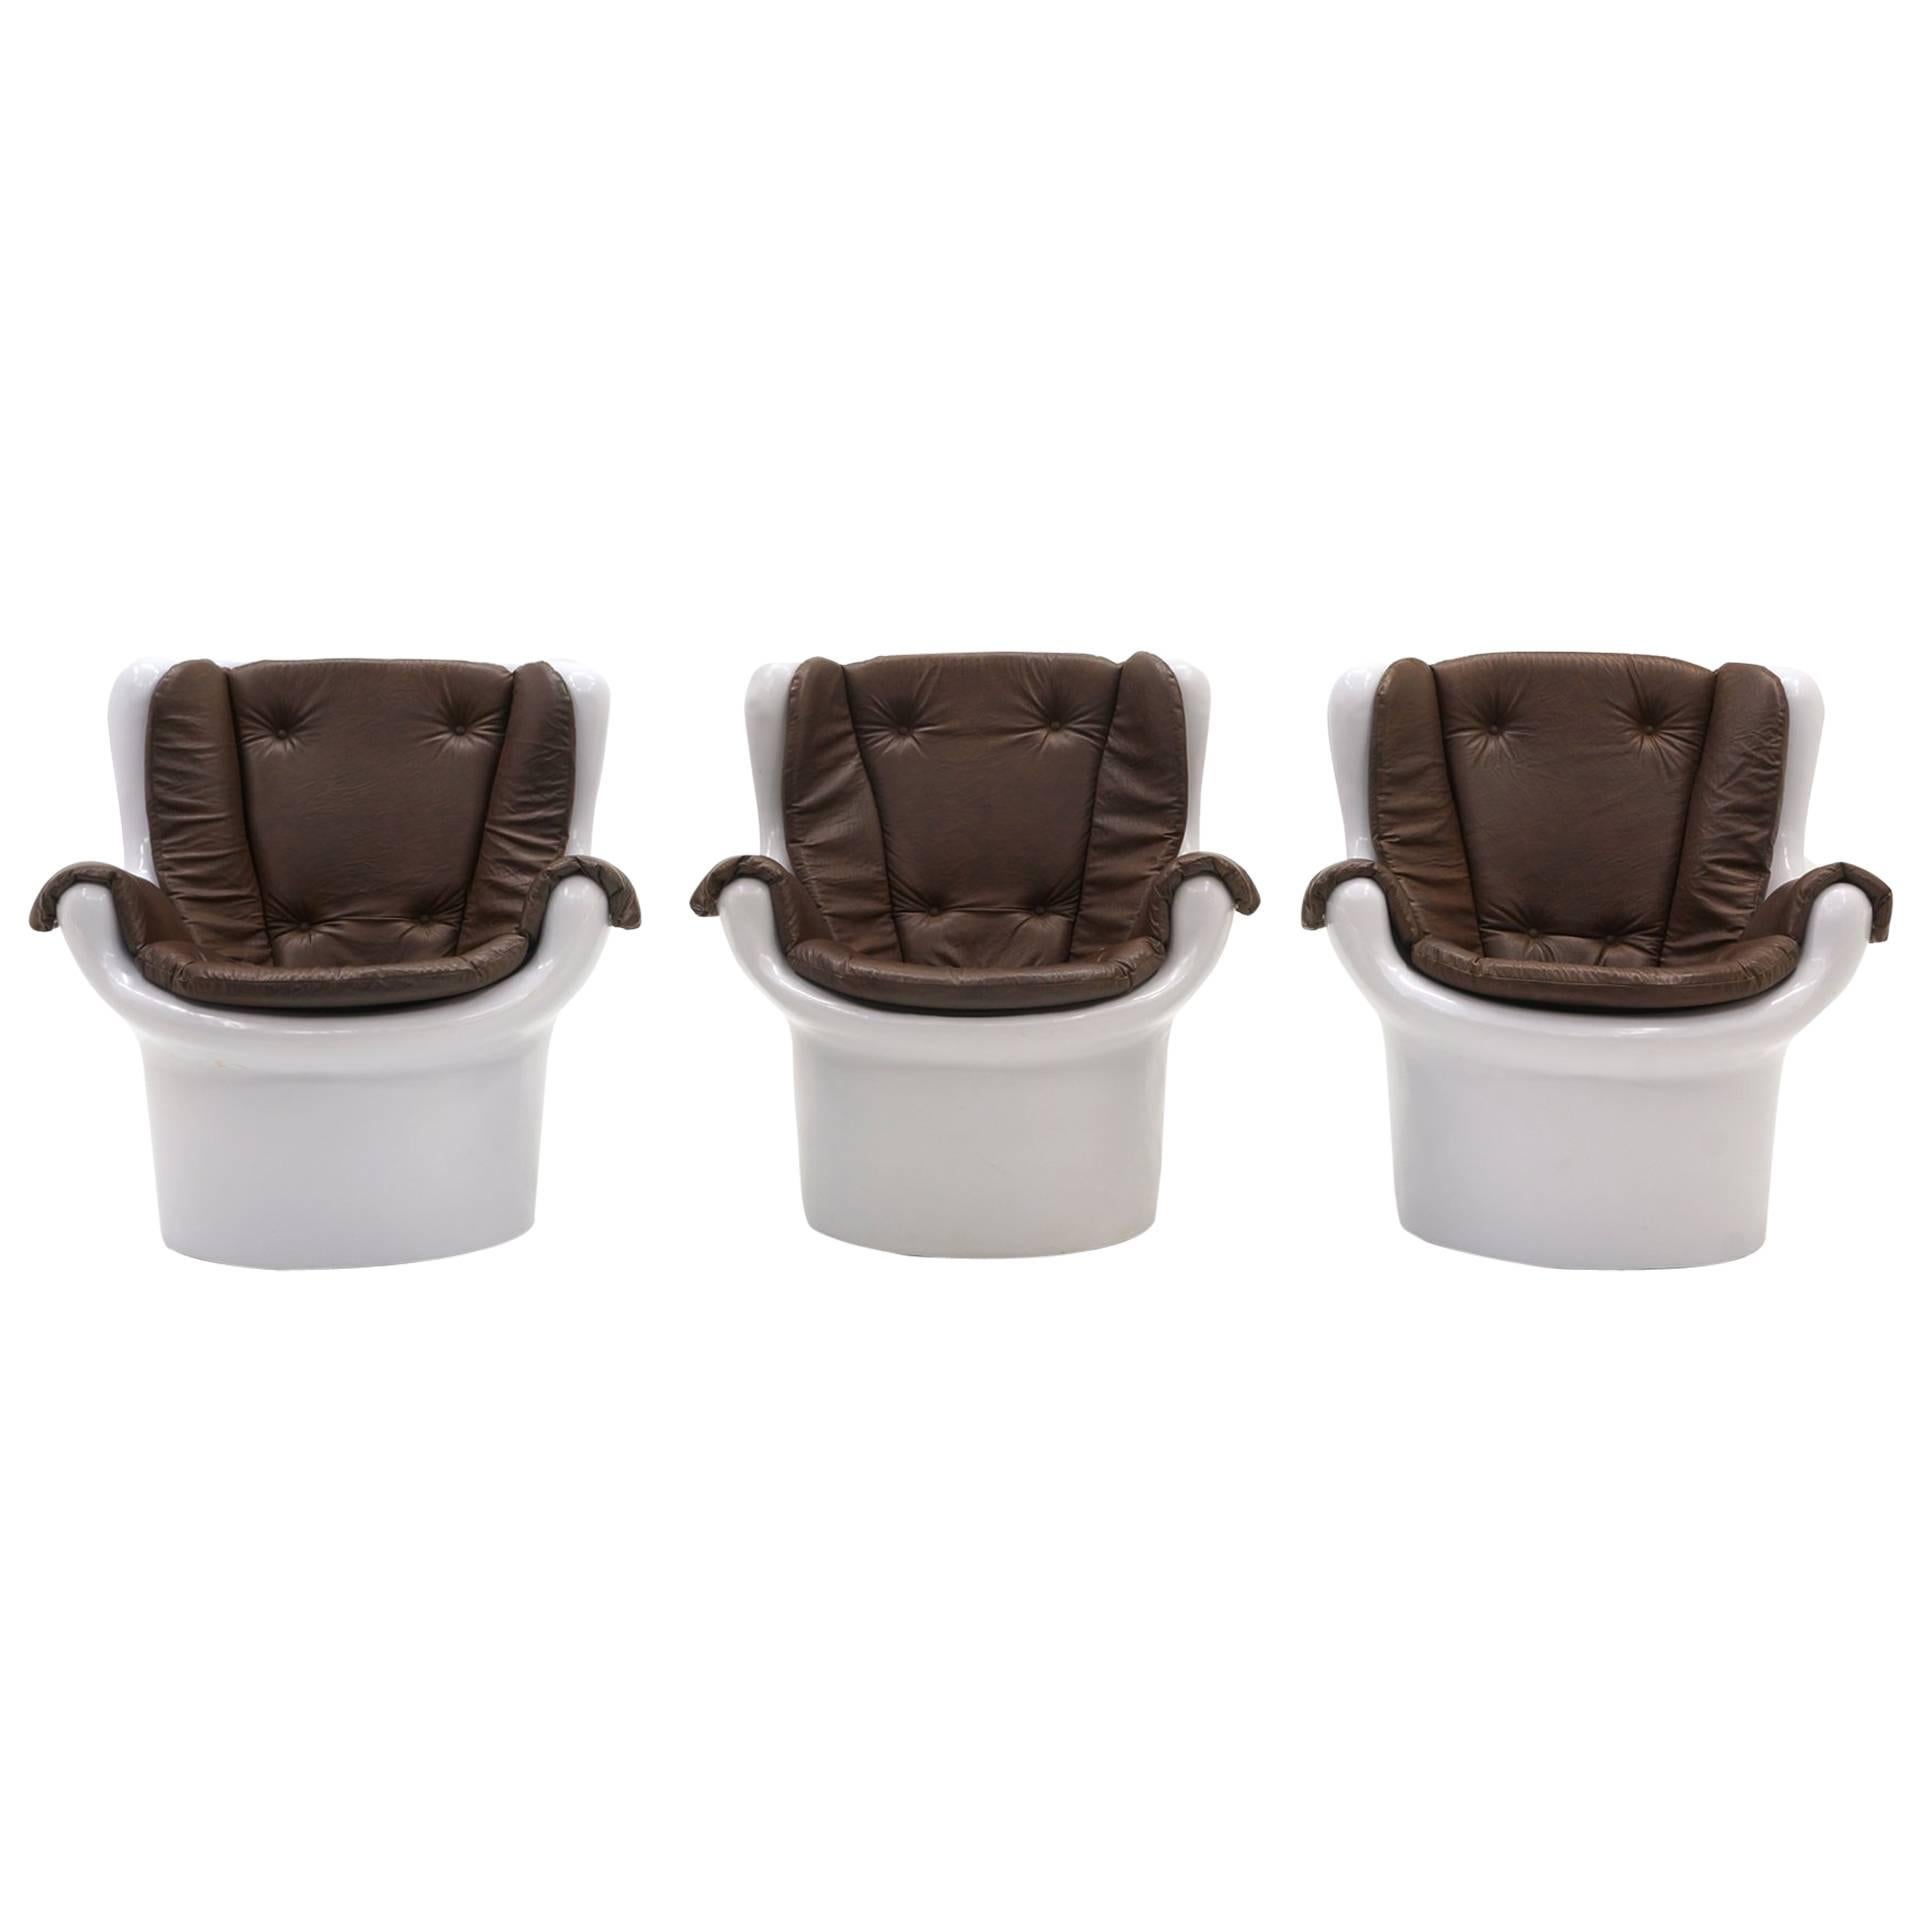 Mod Molded White Plastic, Chocolate Vinyl Lounge Chairs, 1970s. ONE AVAILABLE! For Sale